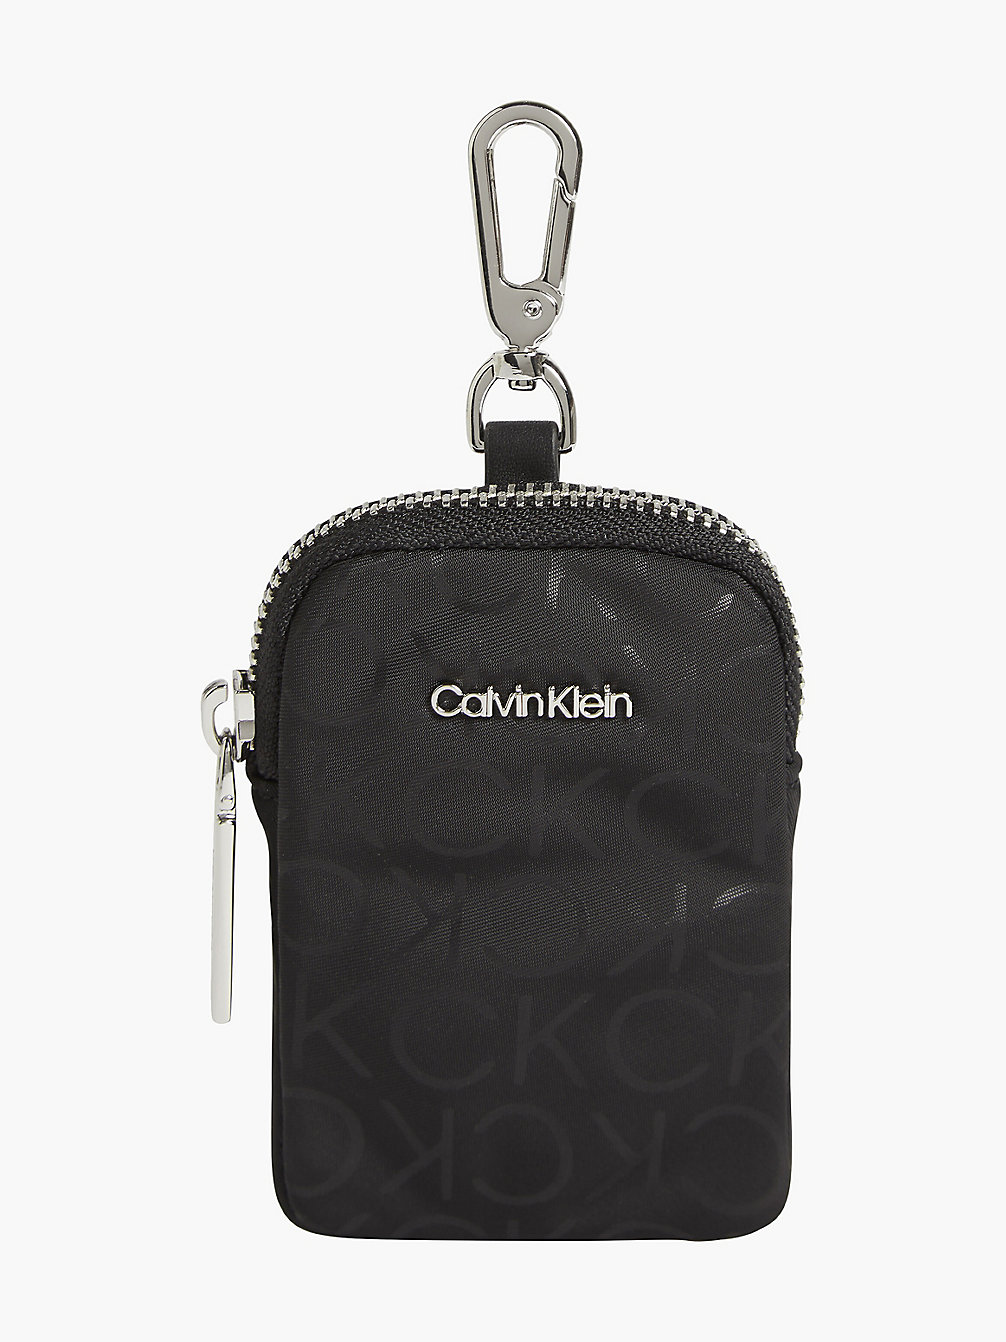 BLACK MONO Recycled Detachable Airpod Pouch undefined women Calvin Klein